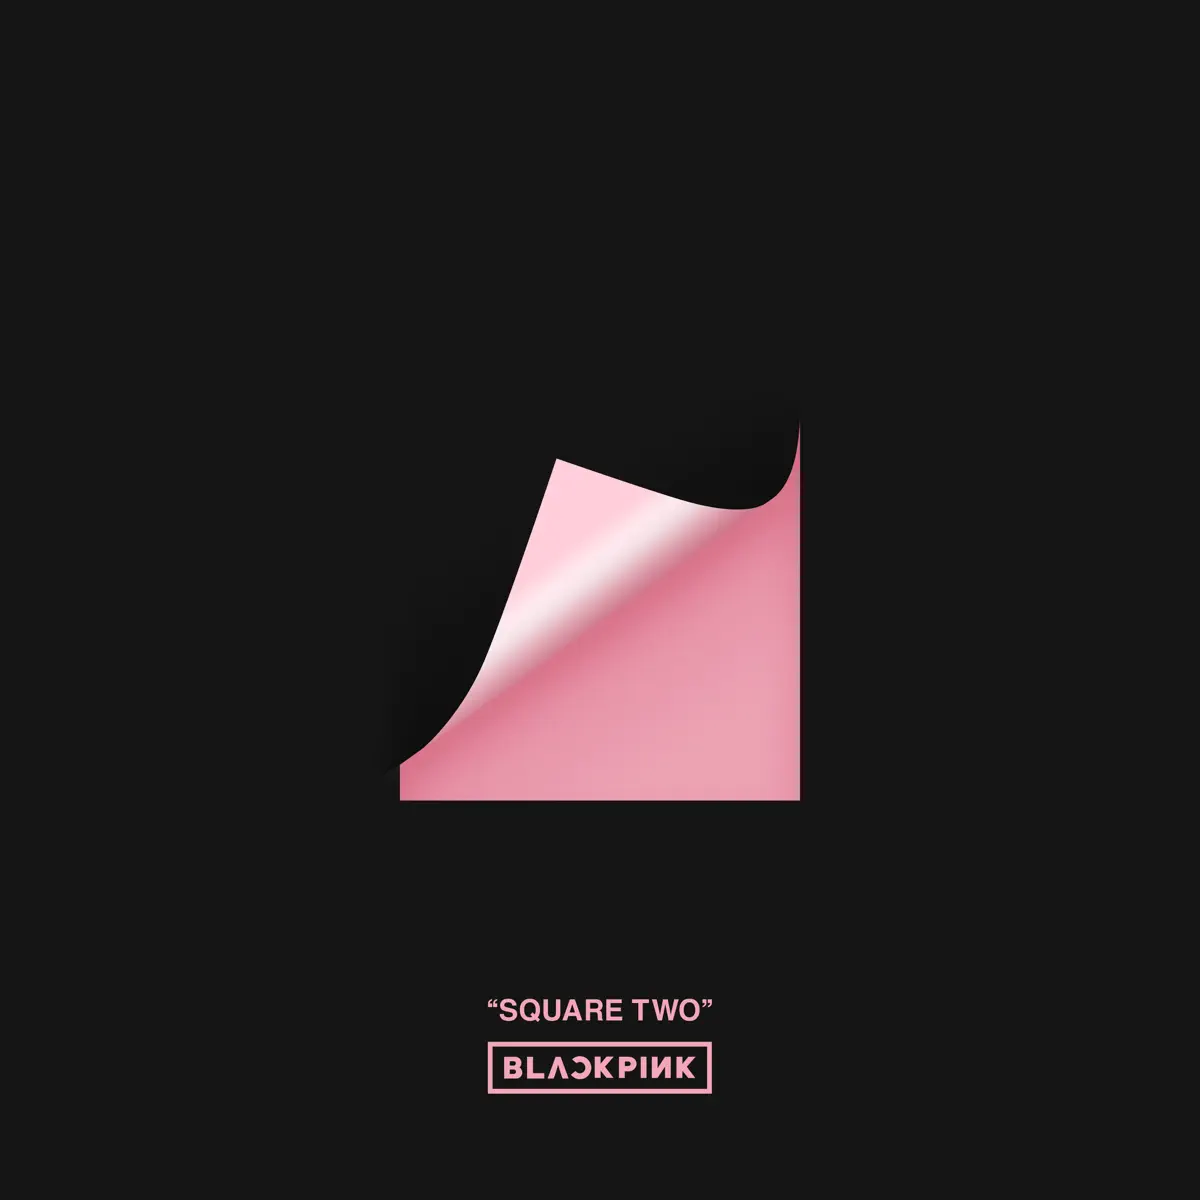 BLACKPINK - SQUARE TWO - EP (2016) [iTunes Plus AAC M4A]-新房子